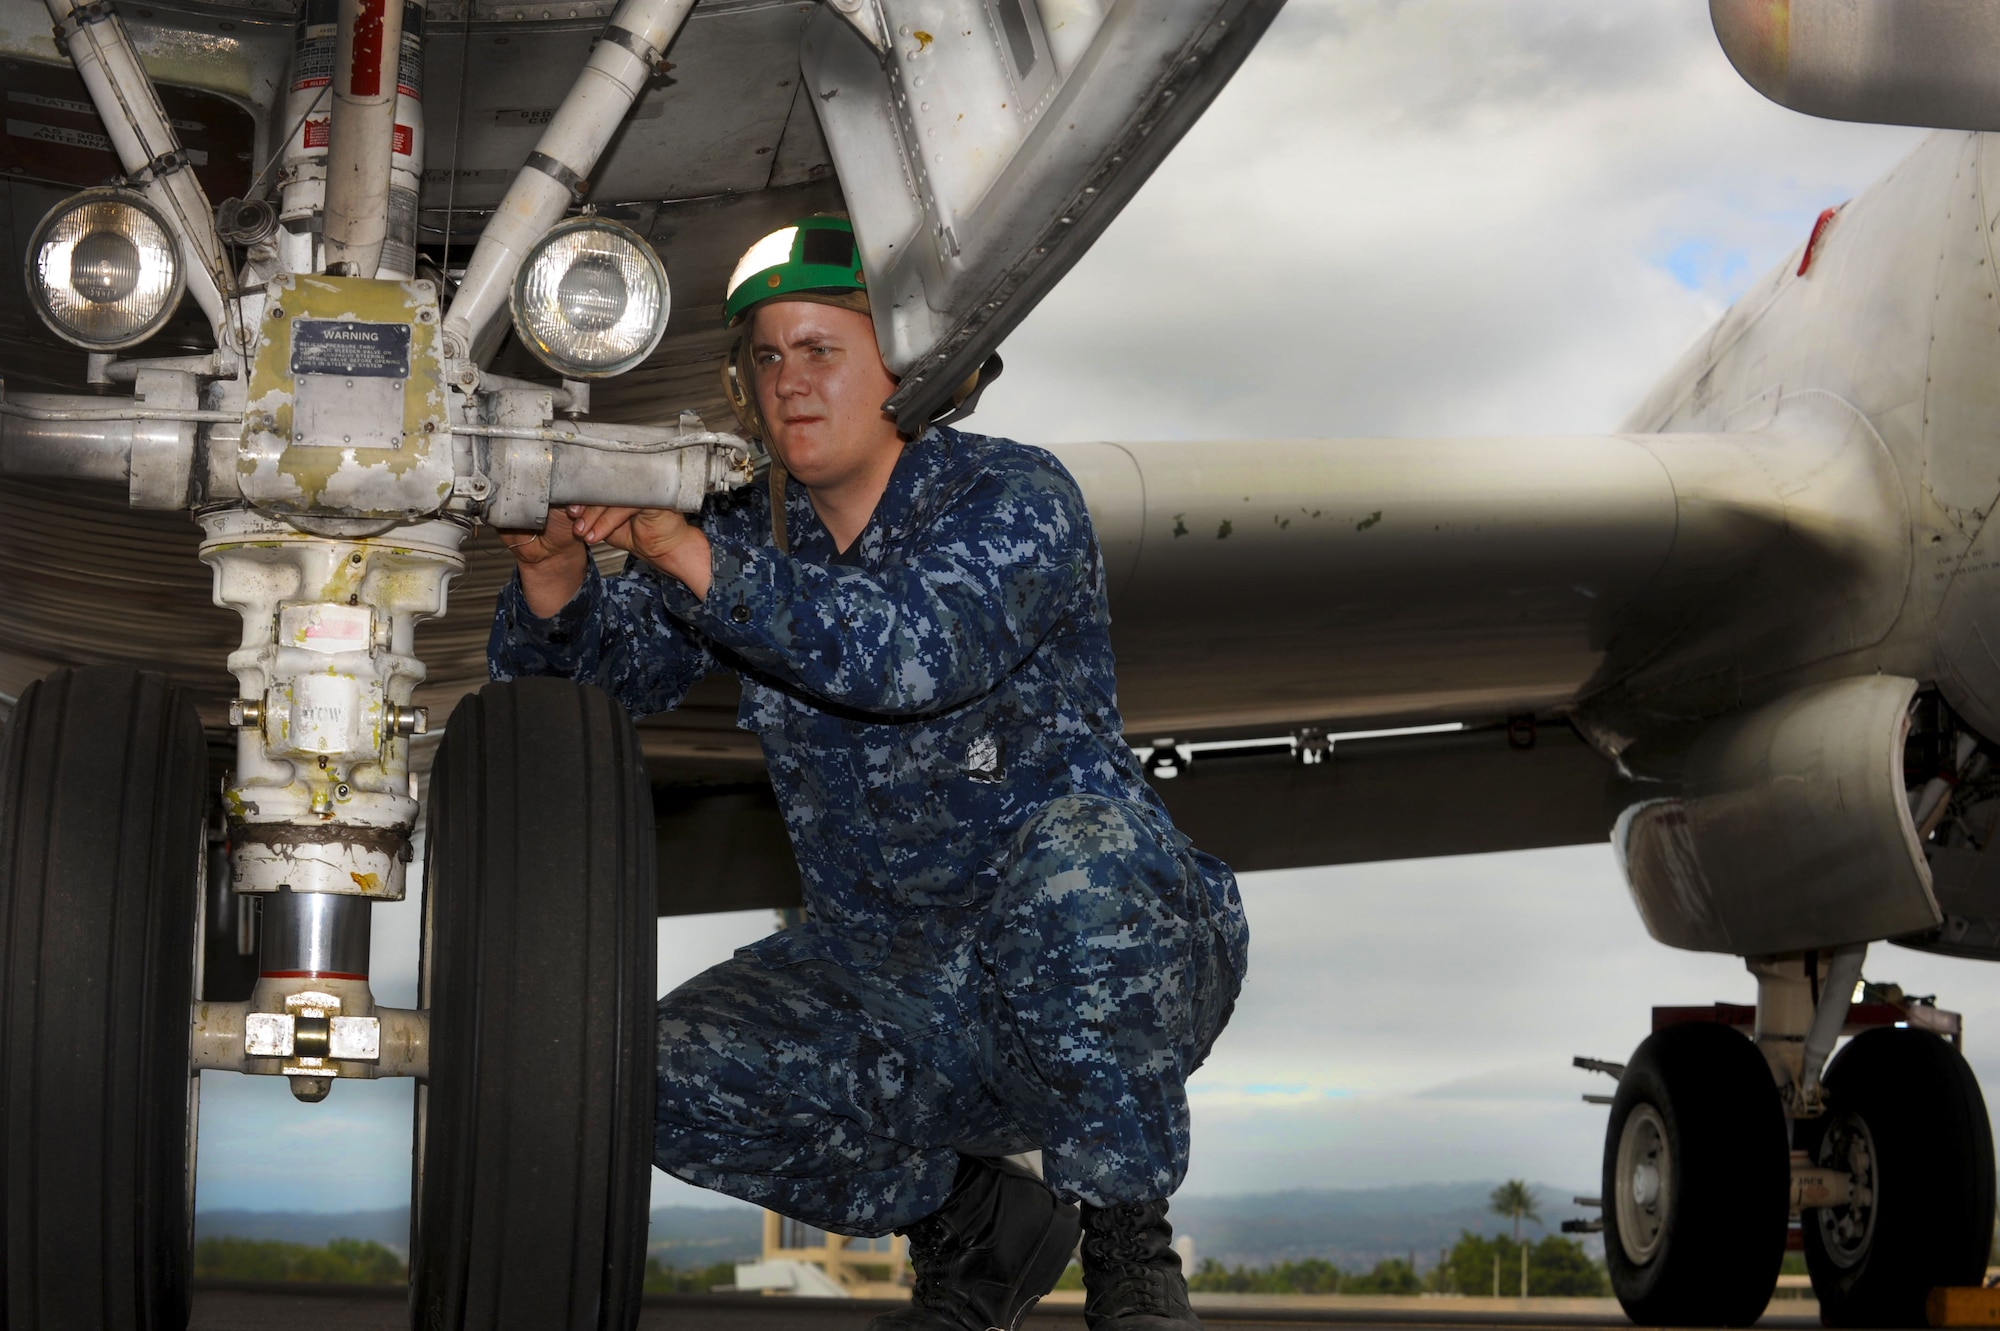 U.S. Navy Airman Joseph Hays checks the safety wiring on the nose landing gear on a P-3 Orion aircraft on the 15th Wing flightline Jan. 6.  The aircraft are temporarily being housed by the 15th Wing due to runway construction at Marine Corps Base Hawaii. The P-3s were initially released to the Navy in 1962 and are used to detect enemy submarines and aircraft. They are also used to view battlespace in order to relay information instantaneously to ground troops. (U.S. Air Force Photo/Airman 1st Class Lauren Main)